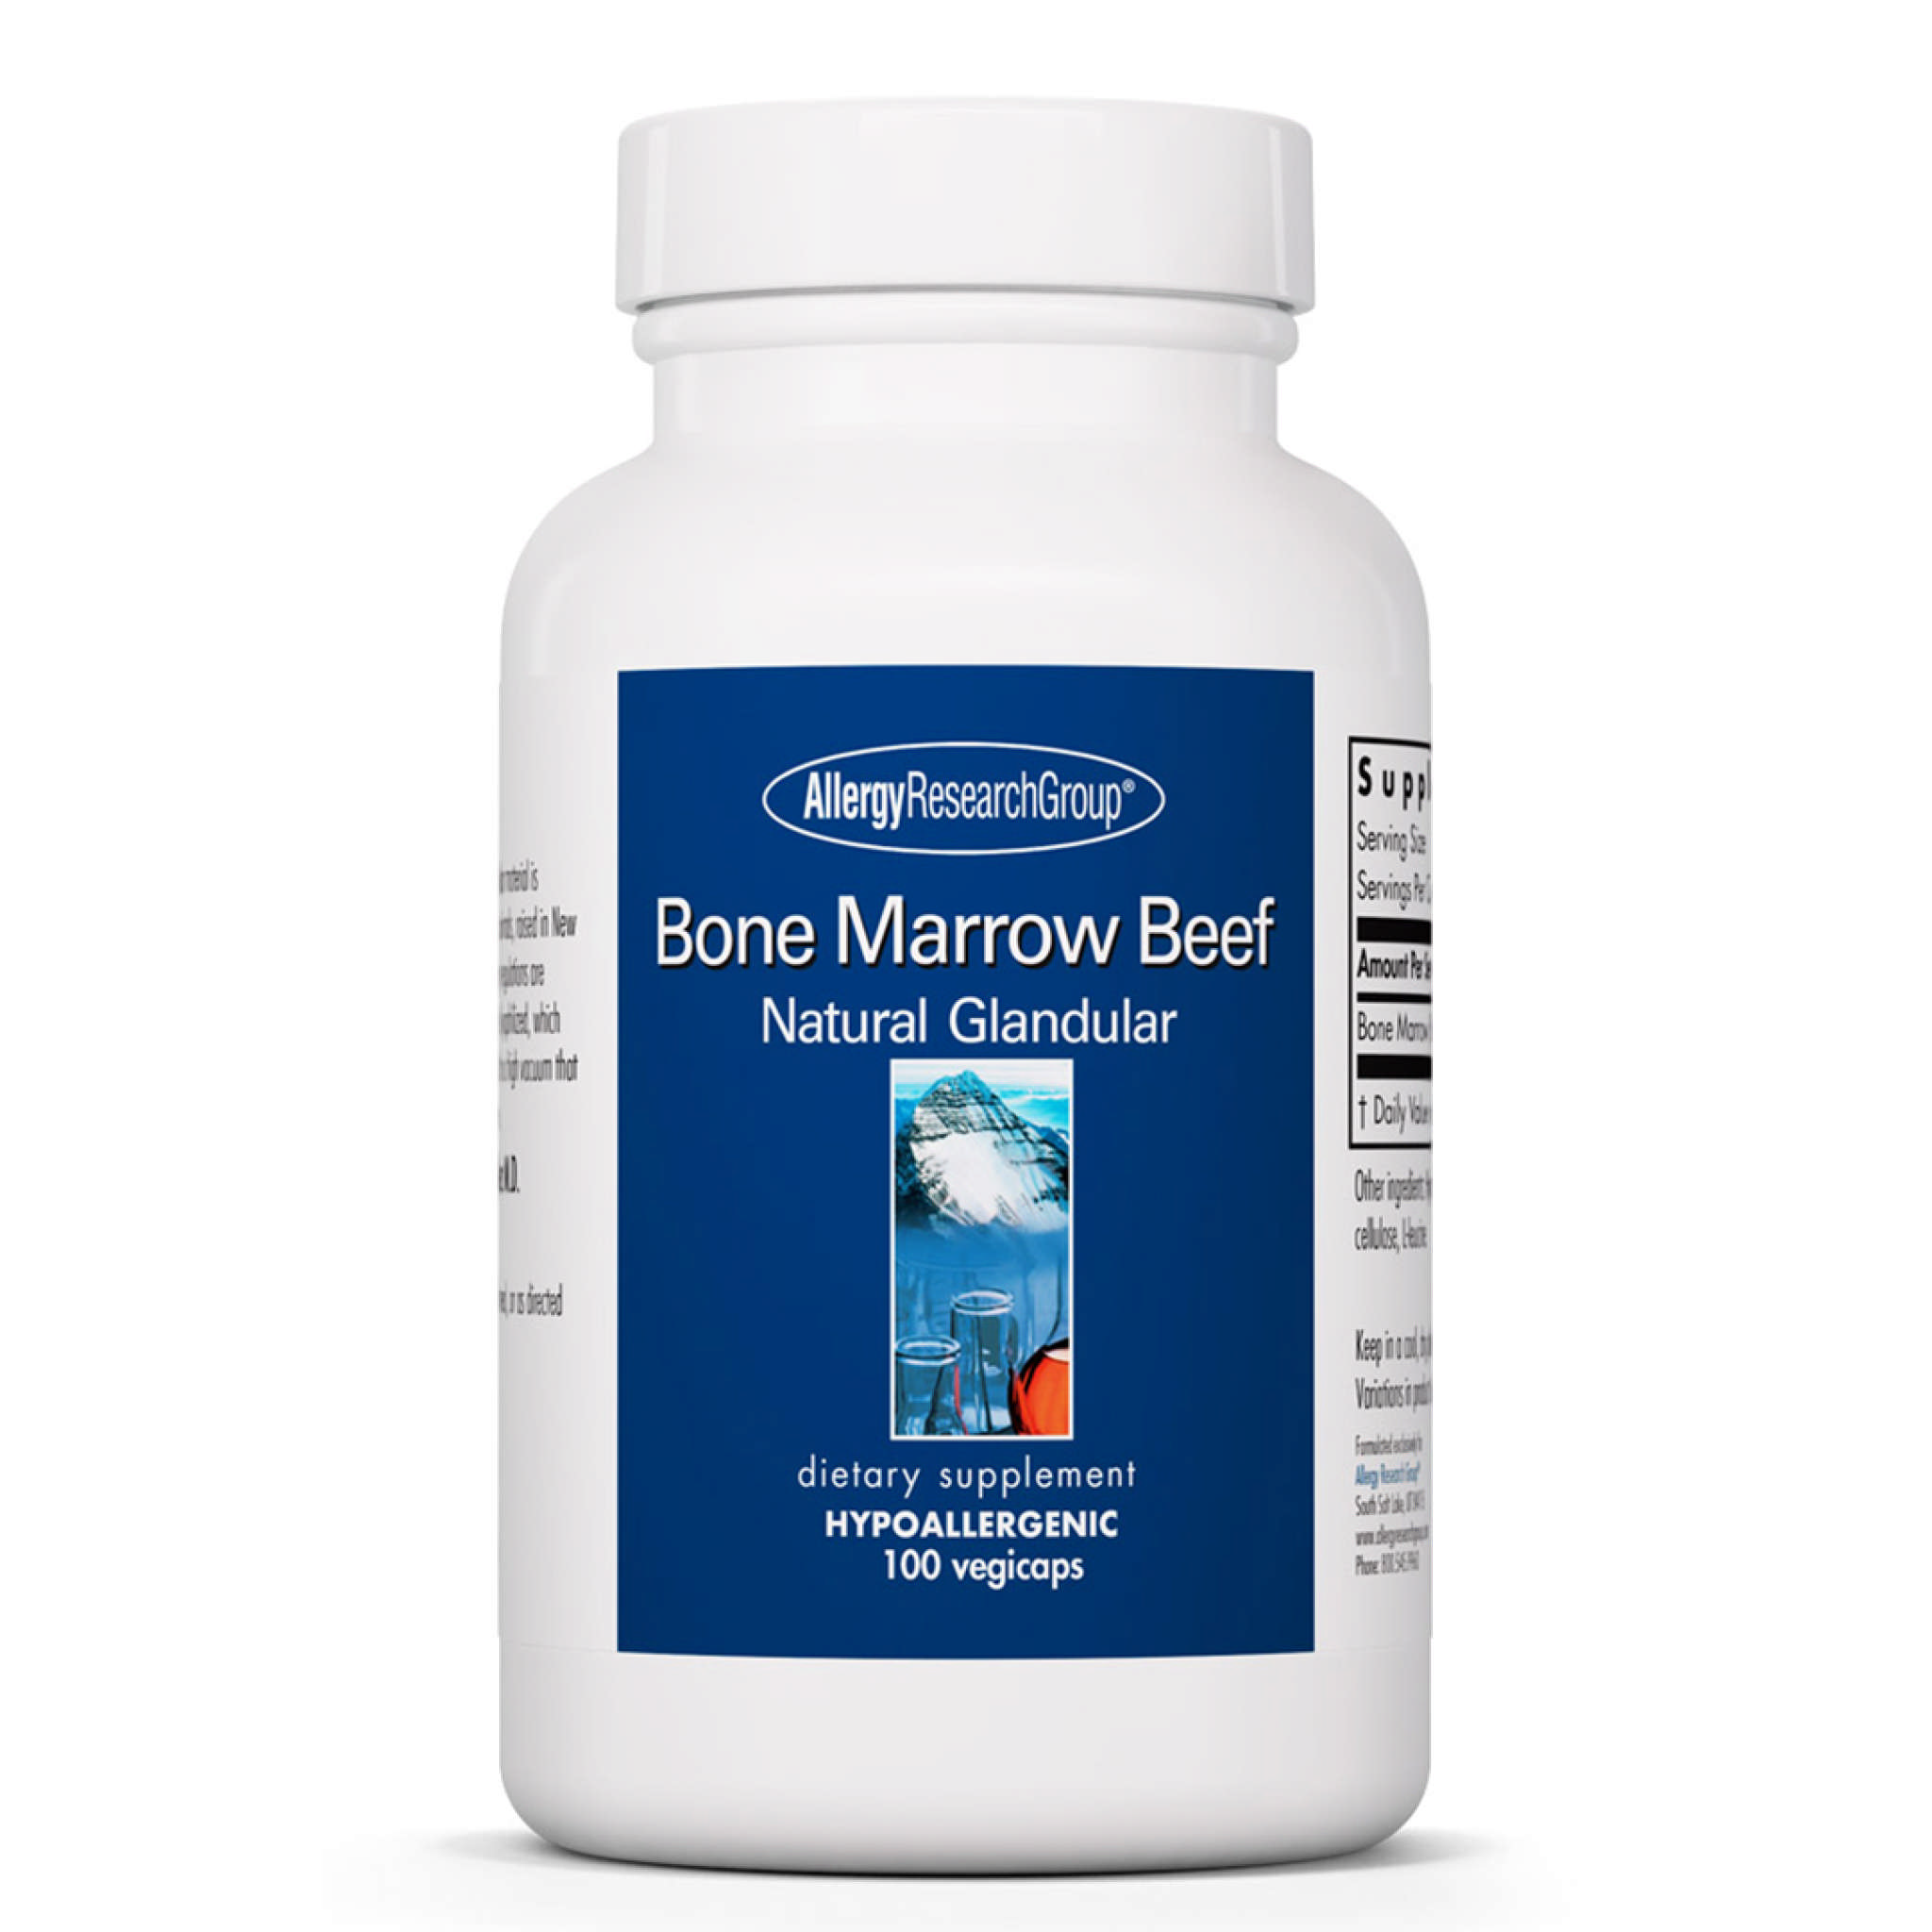 Allergy Research Group - Bone Marrow Beef